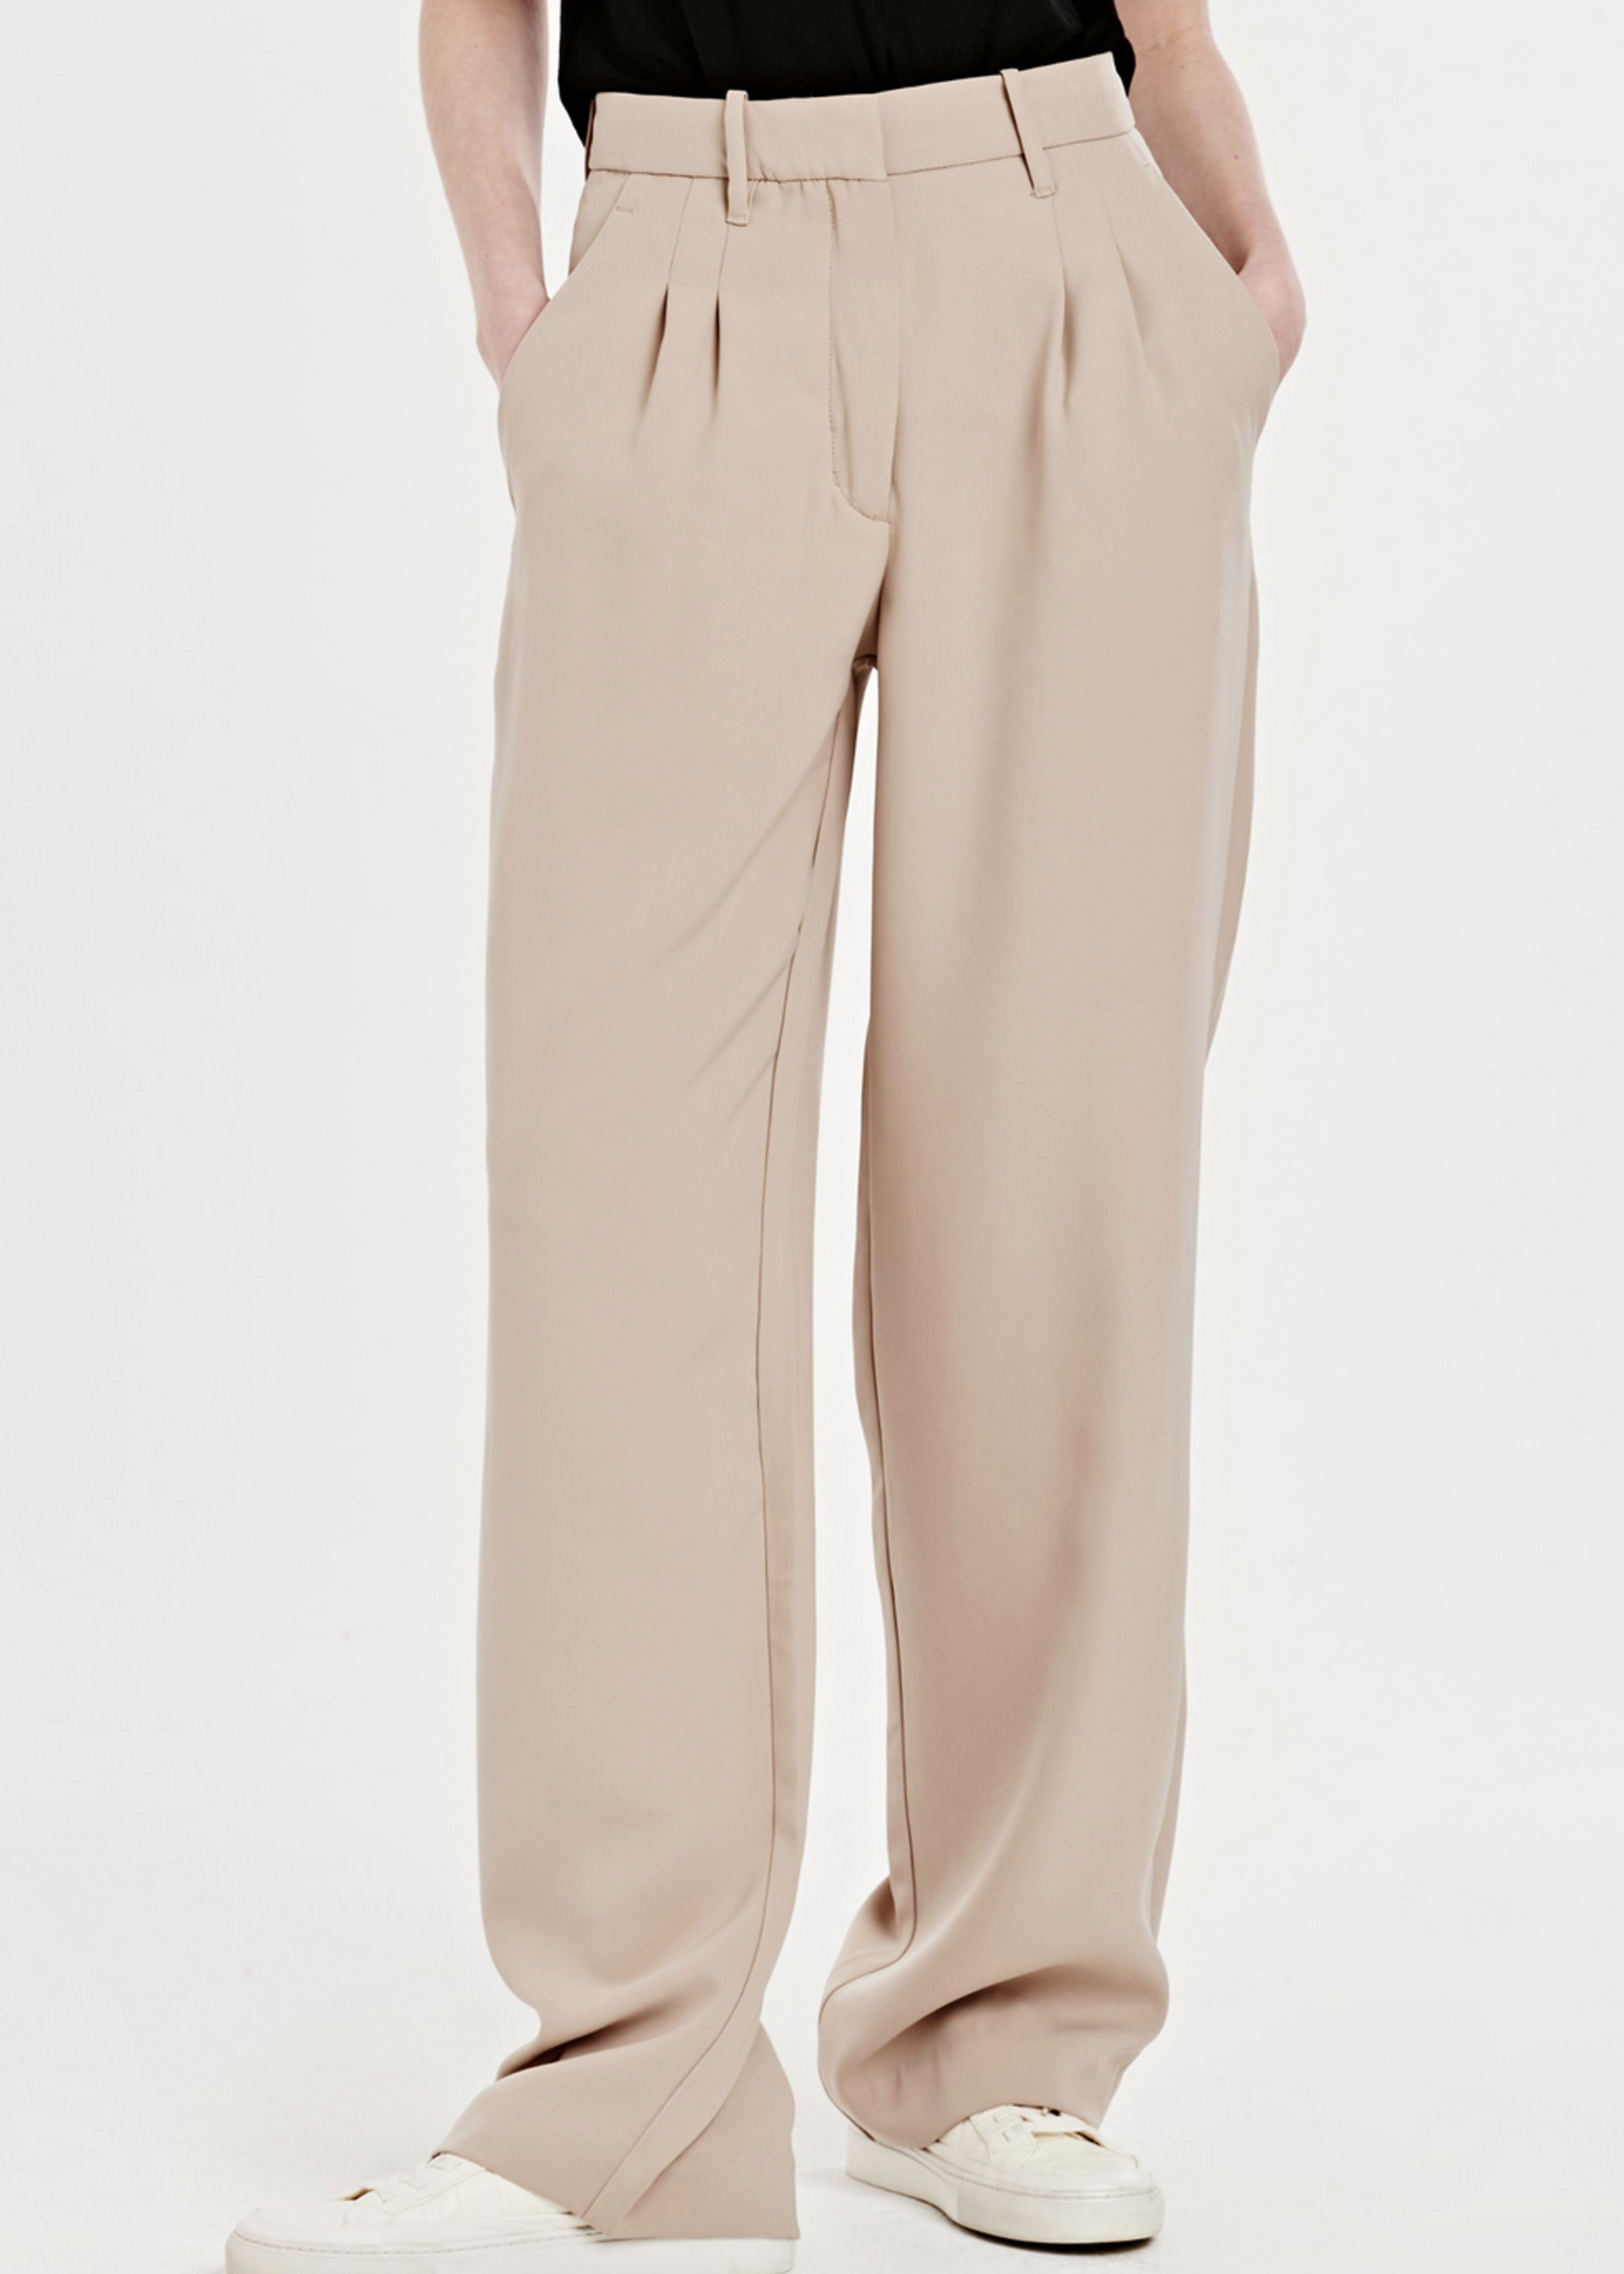 ANOTHER LOVE ADELAIDE PANT